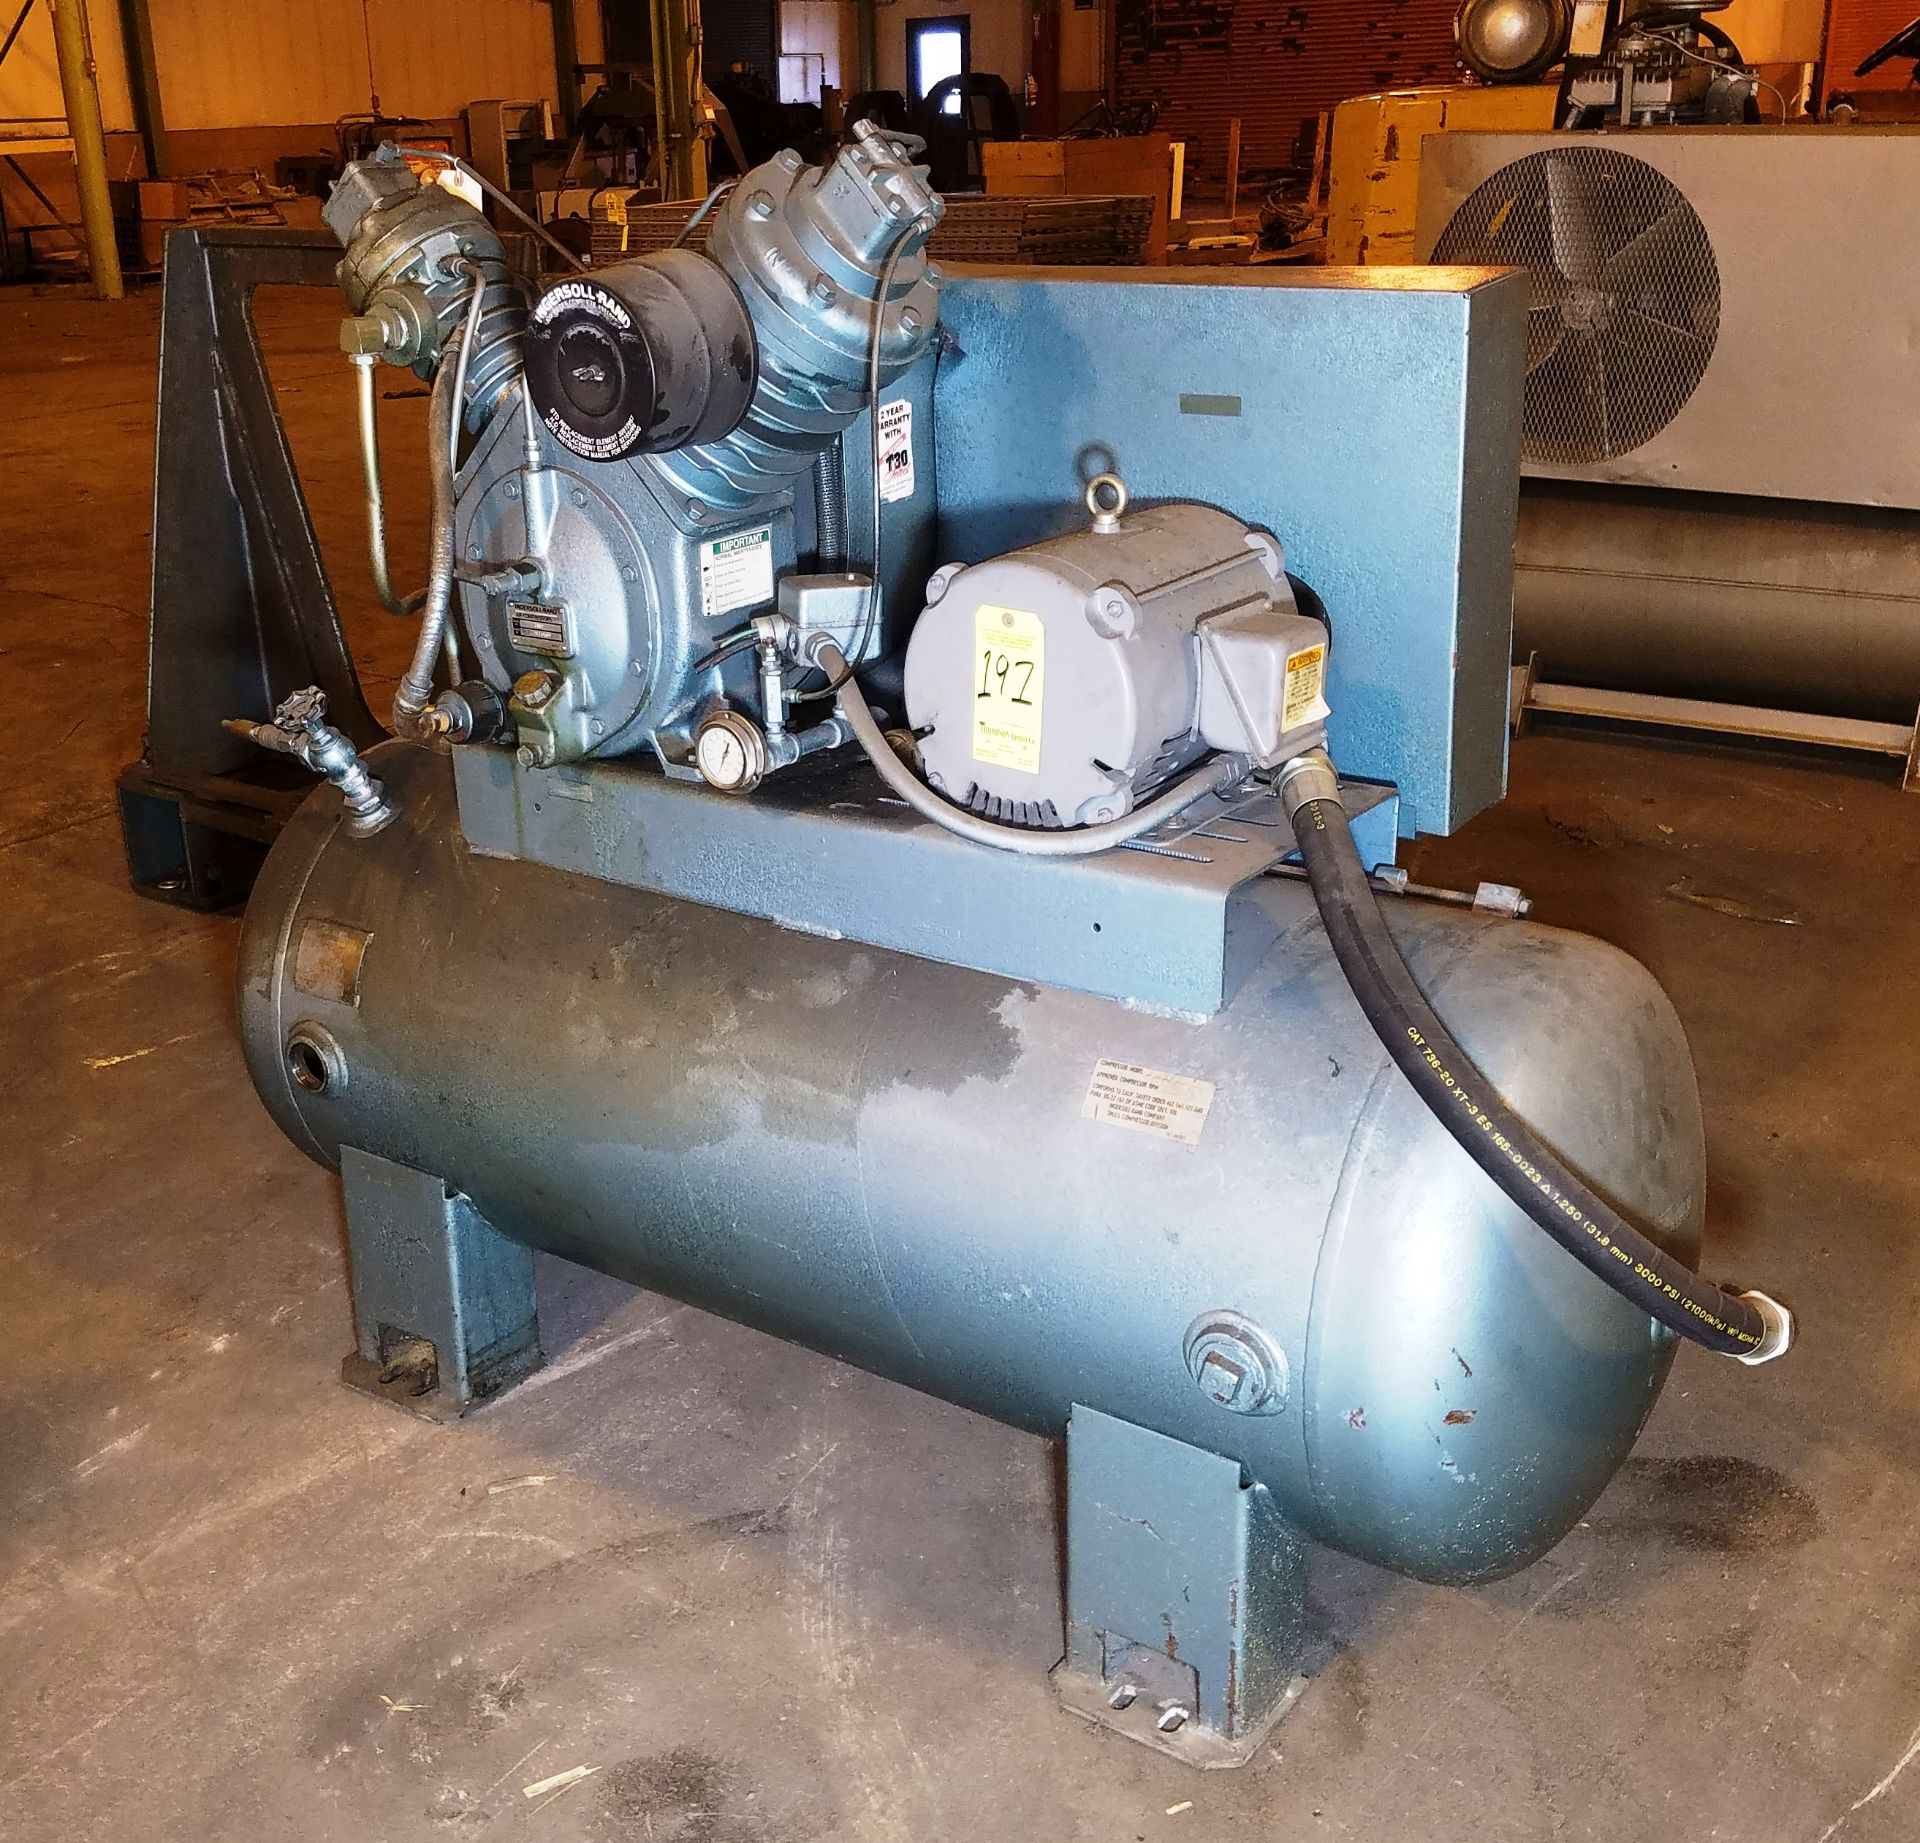 Ingersol Rand Model T30 Air Compressor, 10 HP, 2 Stage